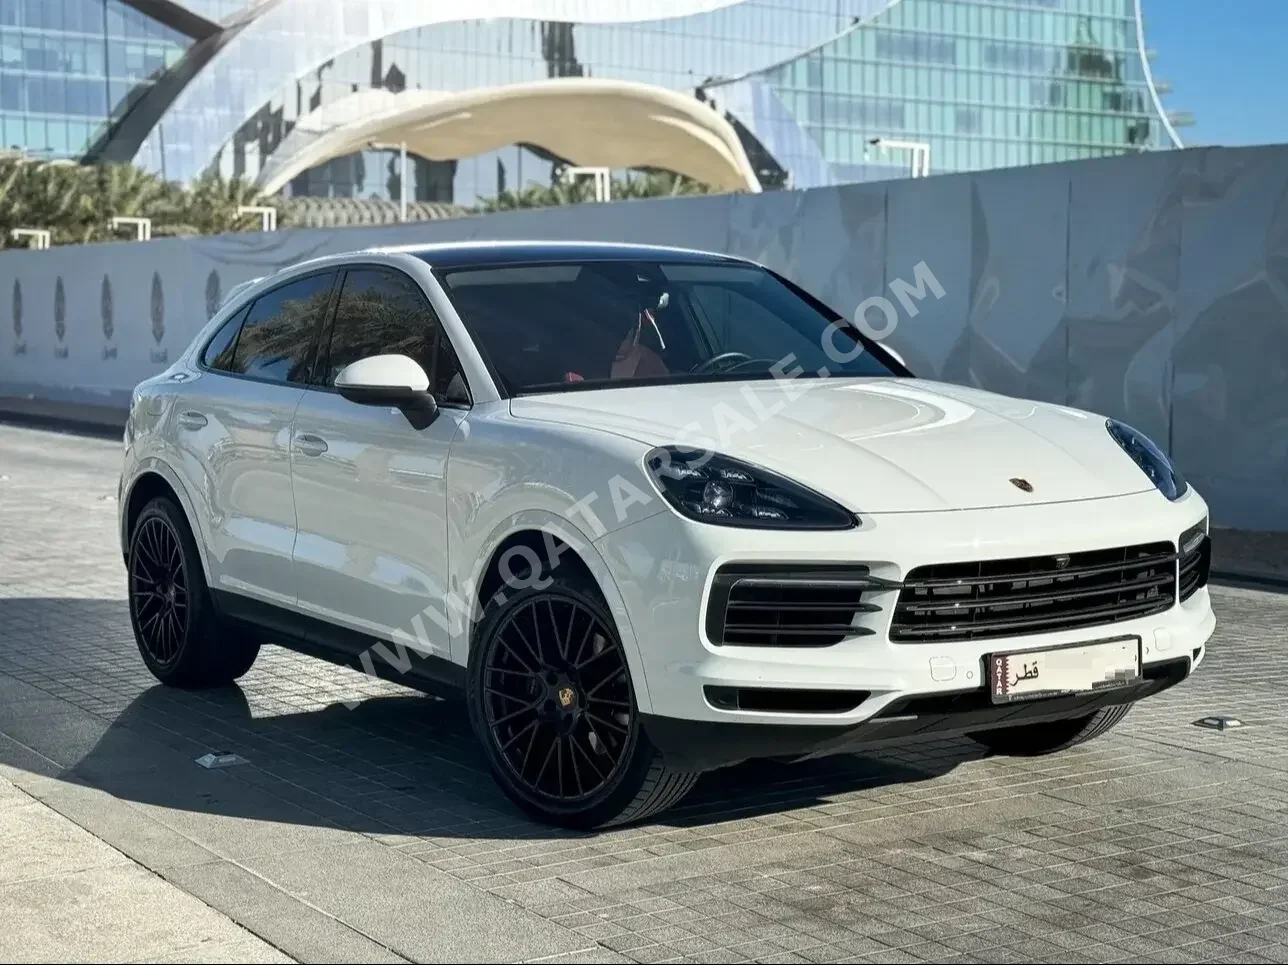 Porsche  Cayenne  Coupe  2020  Automatic  43,000 Km  6 Cylinder  All Wheel Drive (AWD)  SUV  White